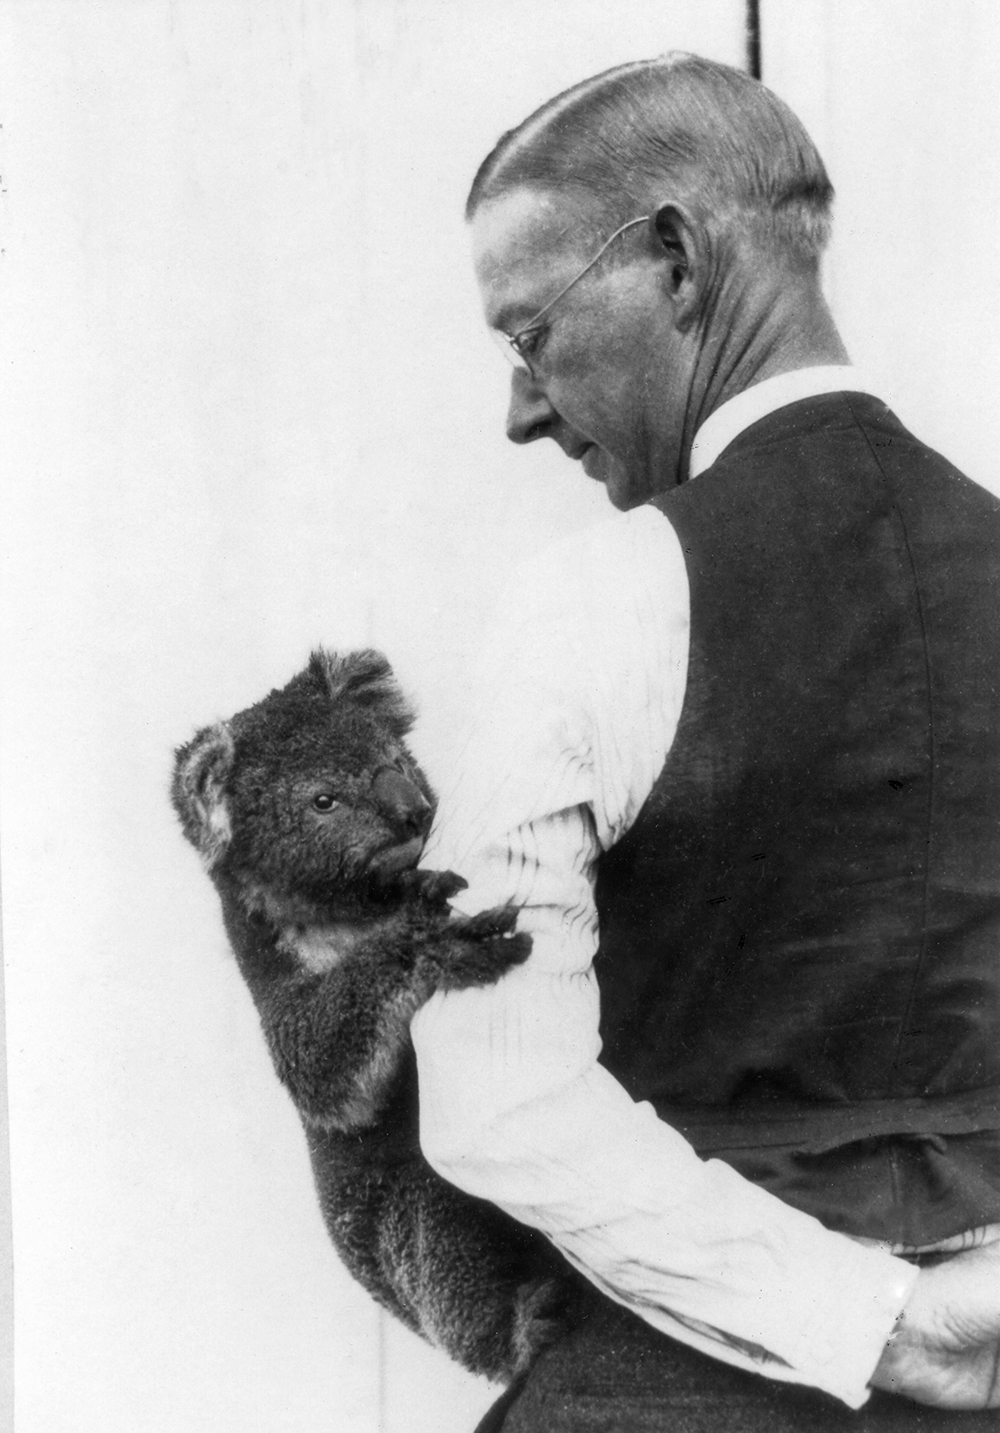 Tom Faulconer and Cuddlepie, nicknamed Cuddles, one of the Zoo's first koalas. Faulconer said he became the most popular passenger on the ship returning to San Diego, because he would periodically take the koalas out of their traveling crates and walk around the deck with them hanging onto his arms, which always drew a crowd.